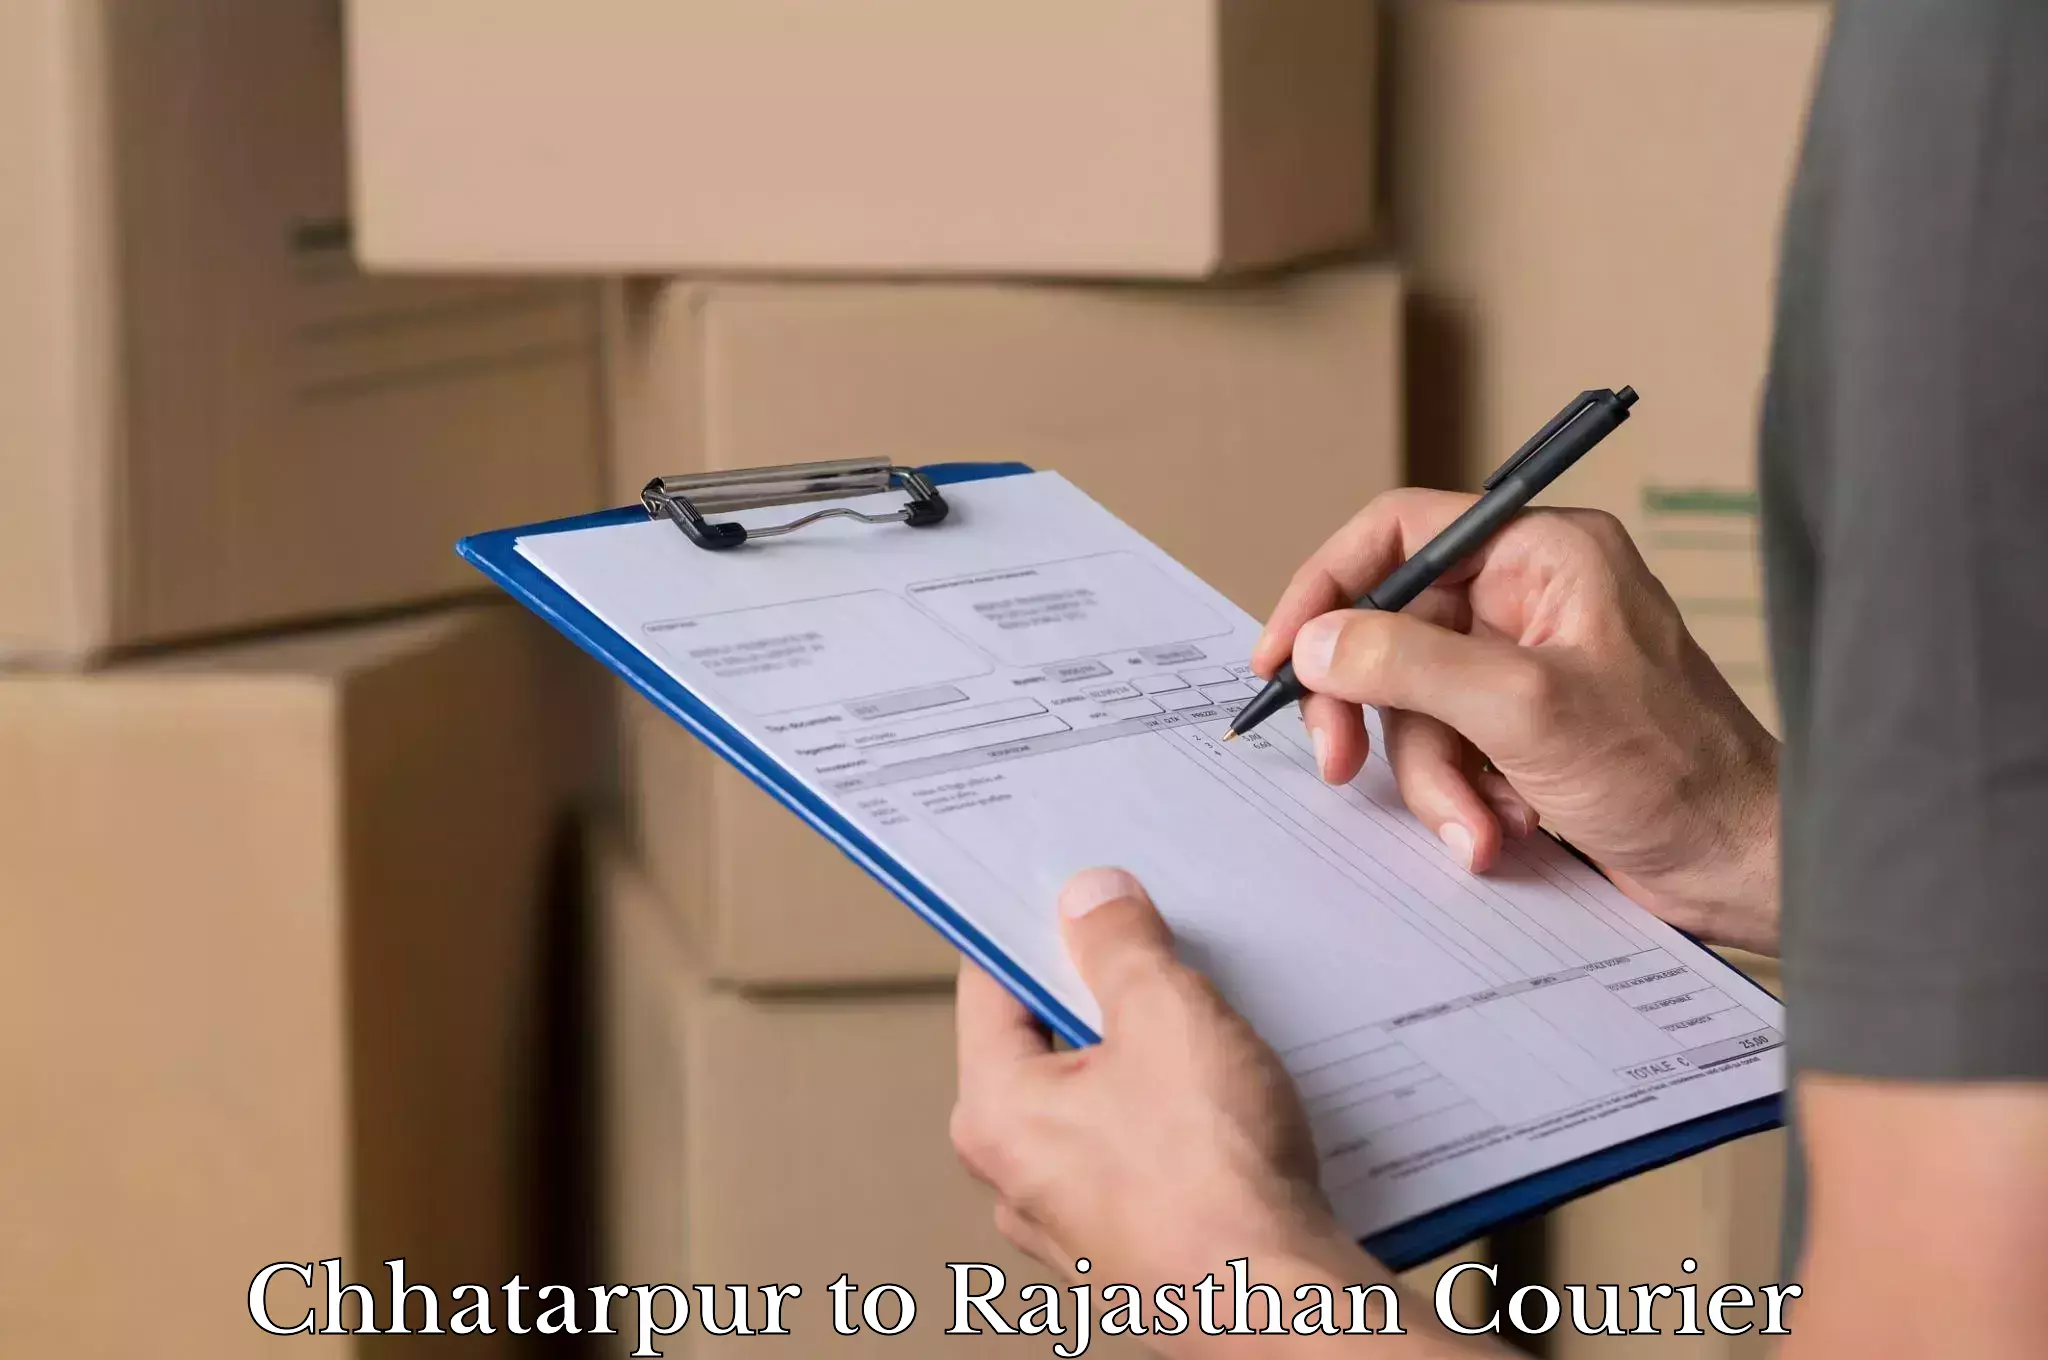 Luggage shipping specialists Chhatarpur to Rajasthan